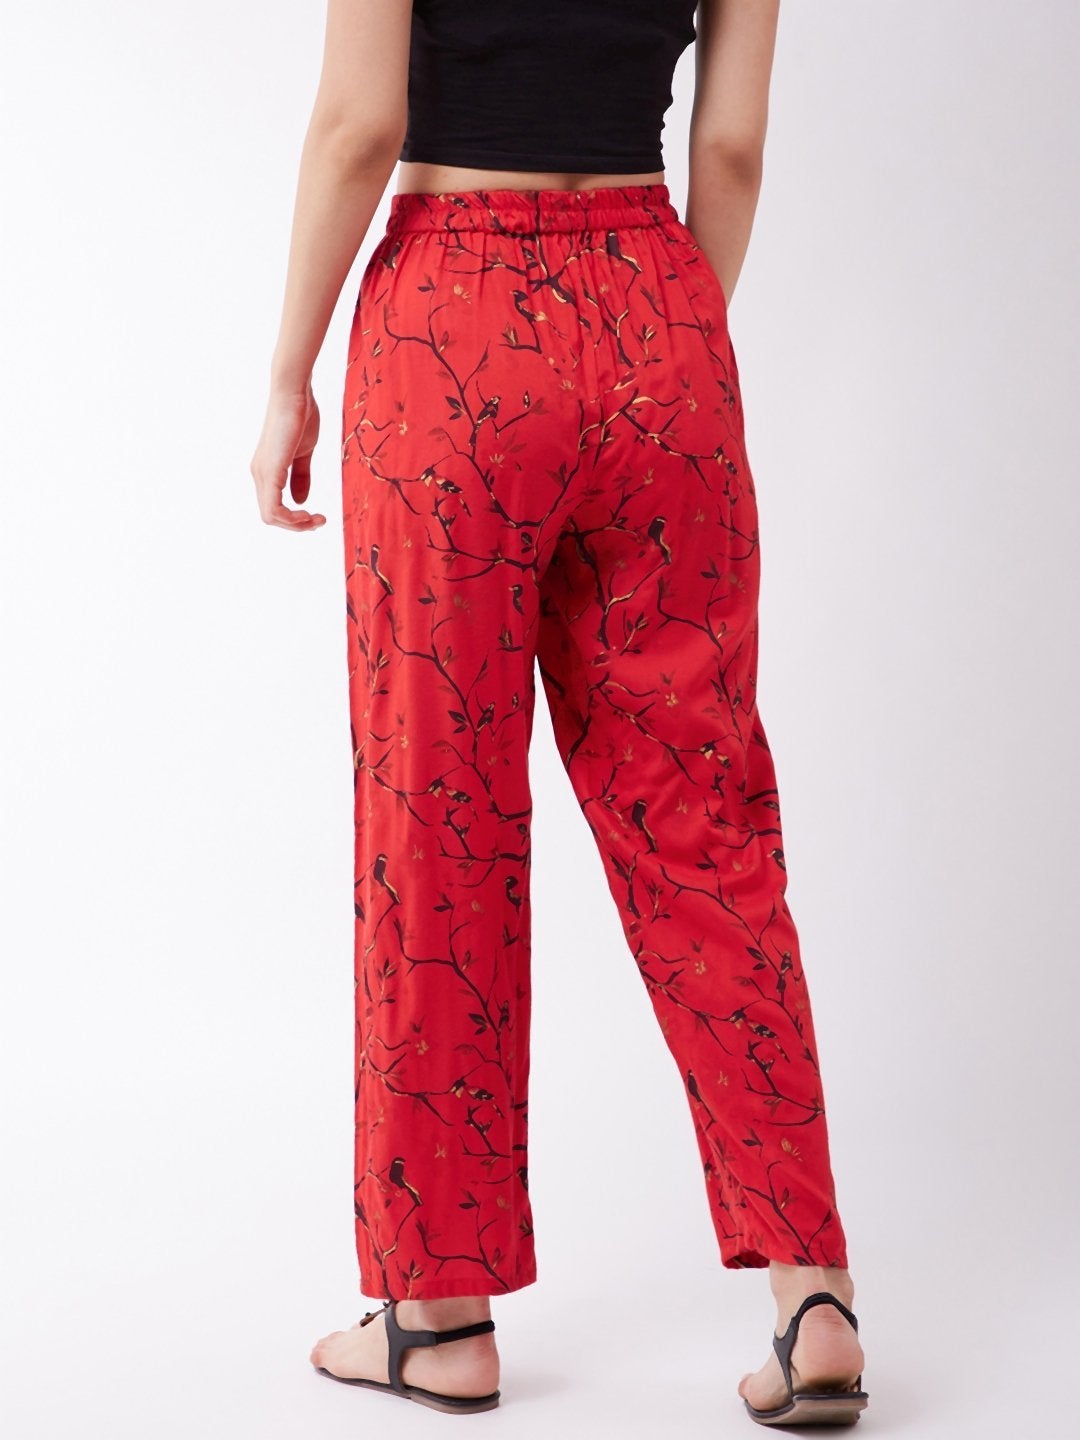 Women's Red &Gold Pant - InWeave